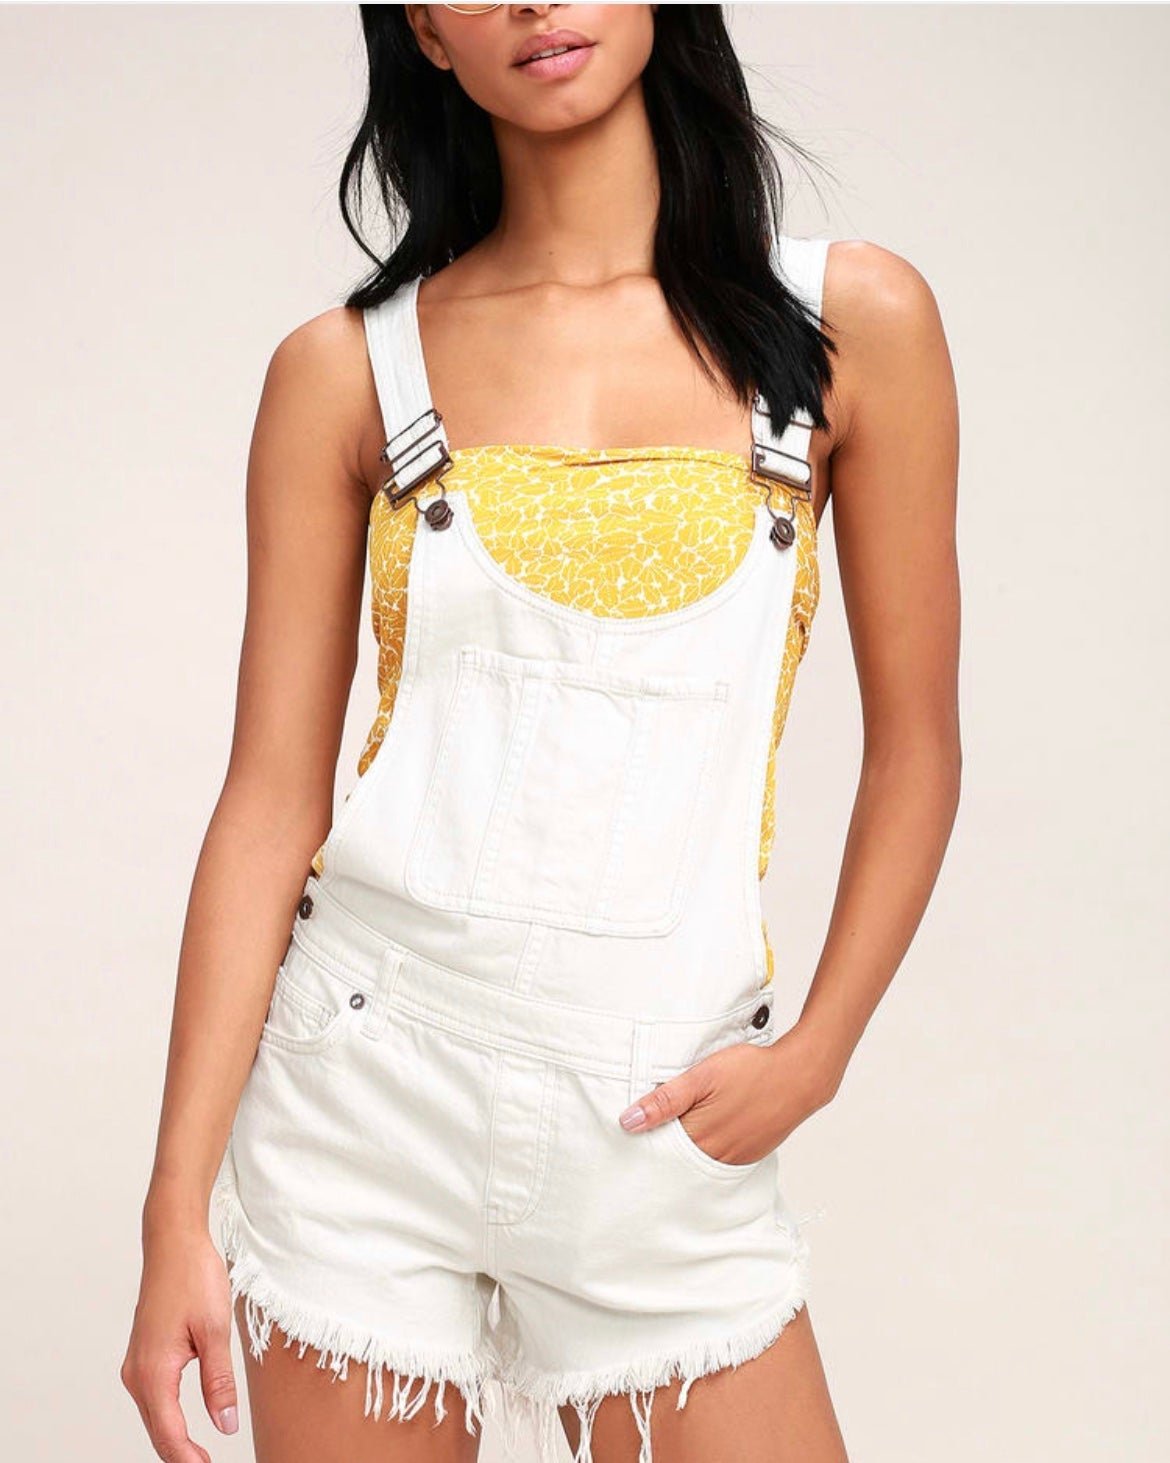 the Lowest price Free People Summer Babe High Low Distressed Denim Short Overalls j3wAqB5LF Factory Price